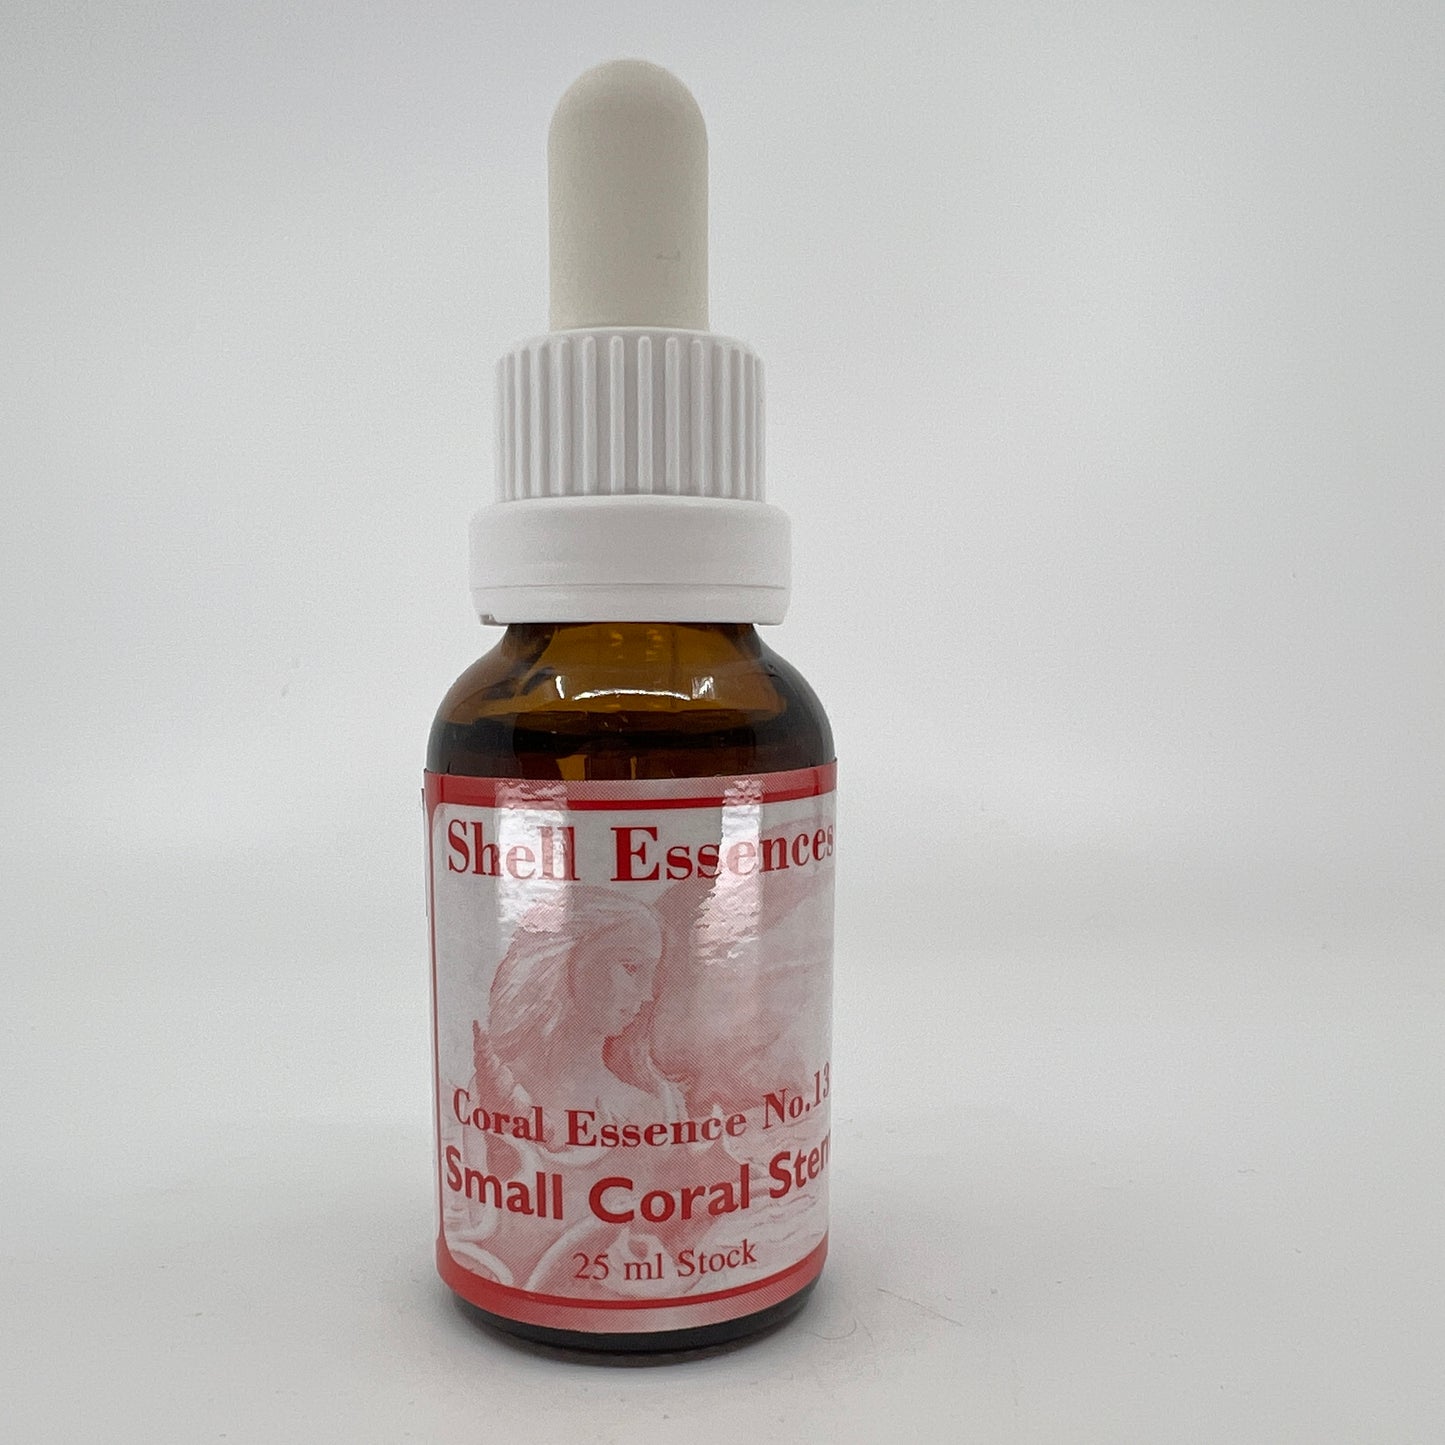 Small coral stem coral essence 25ml